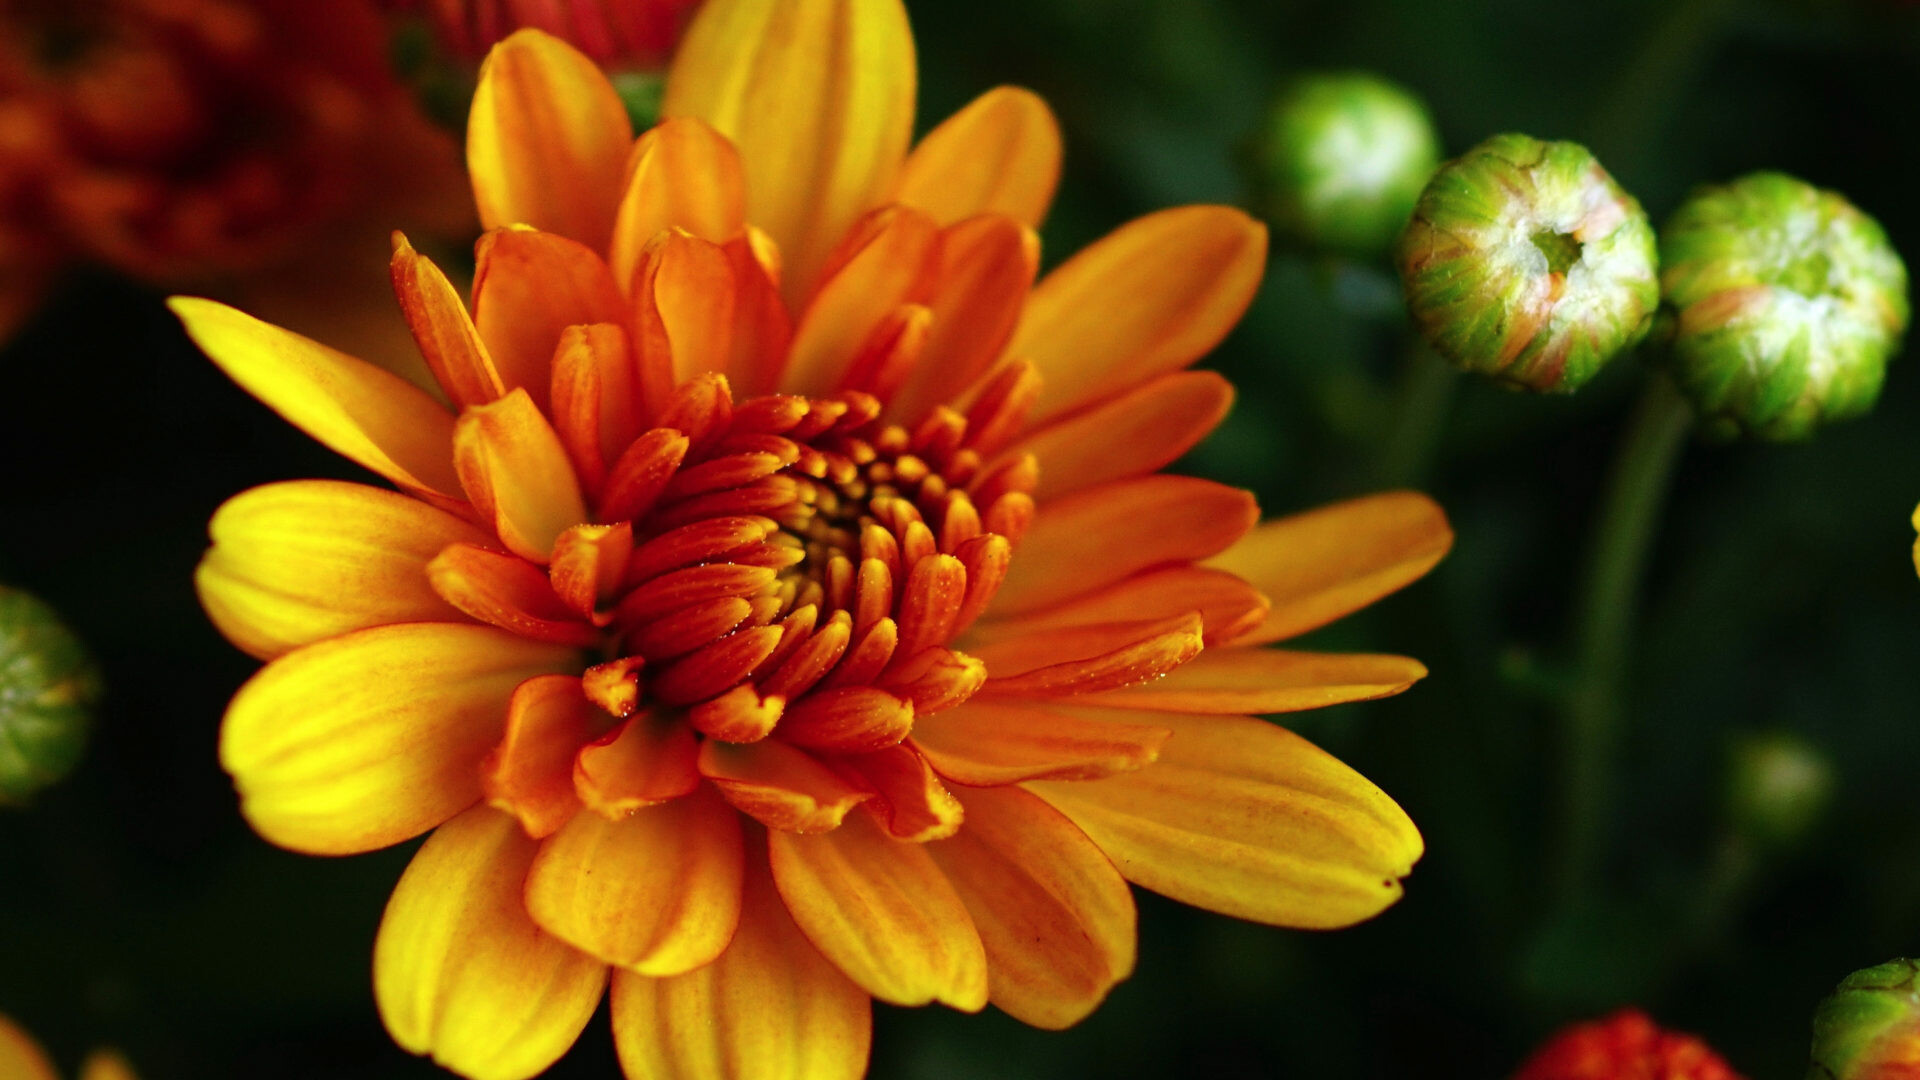 Chrysanthemum: A group of erect, herbaceous perennial plants in the flowering plant family Asteraceae. 1920x1080 Full HD Background.